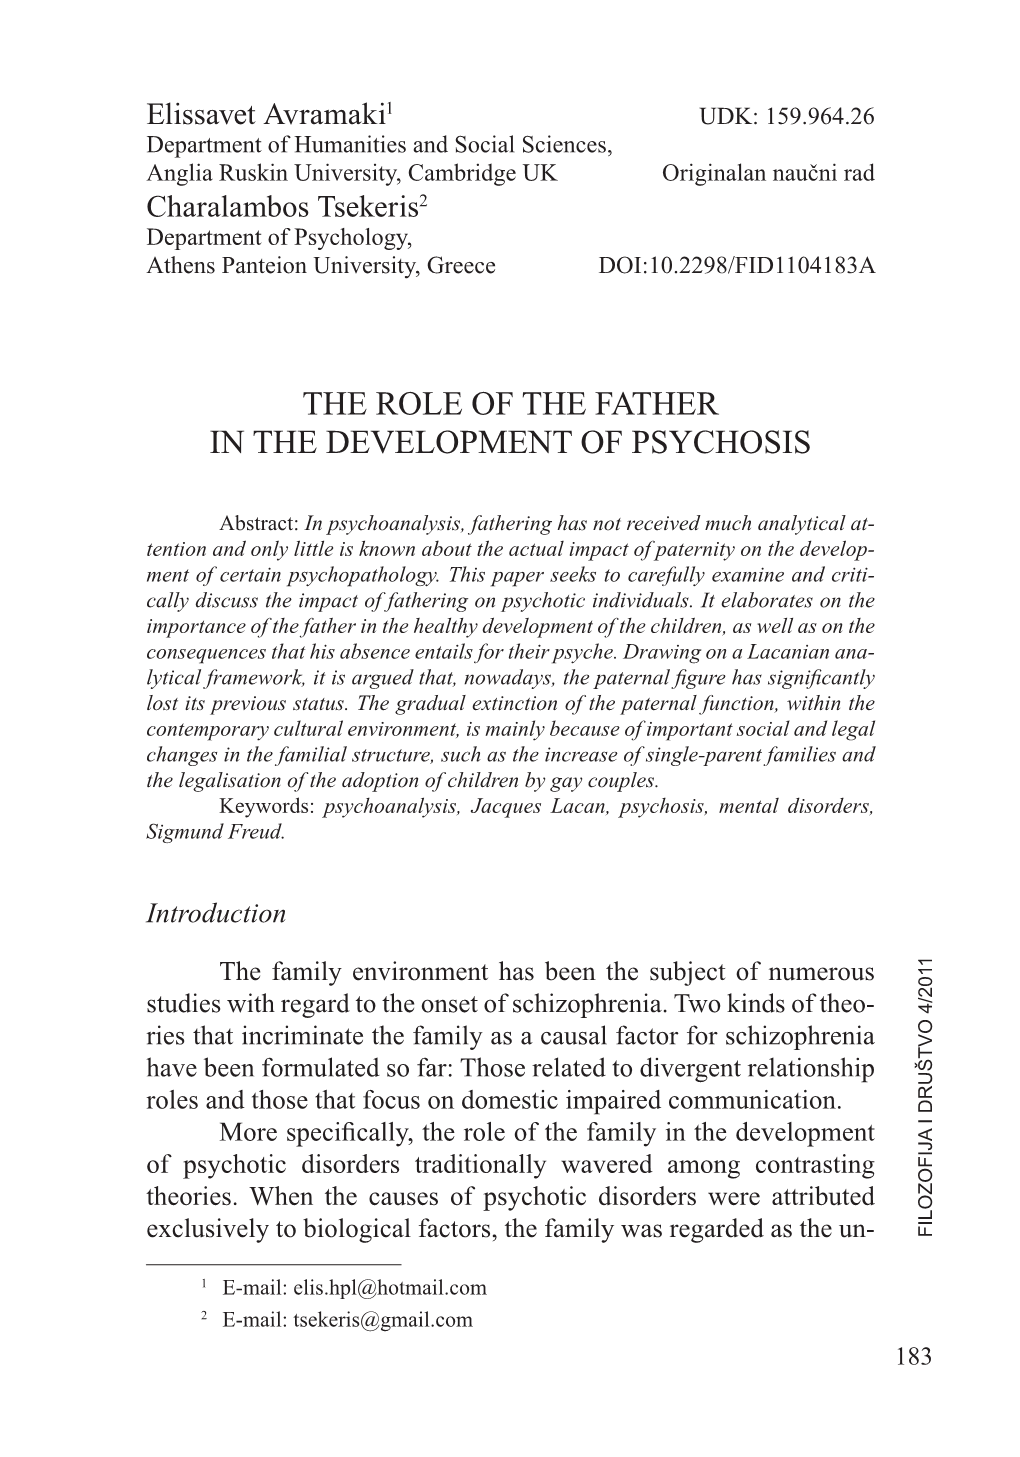 The Role of the Father in the Development of Psychosis